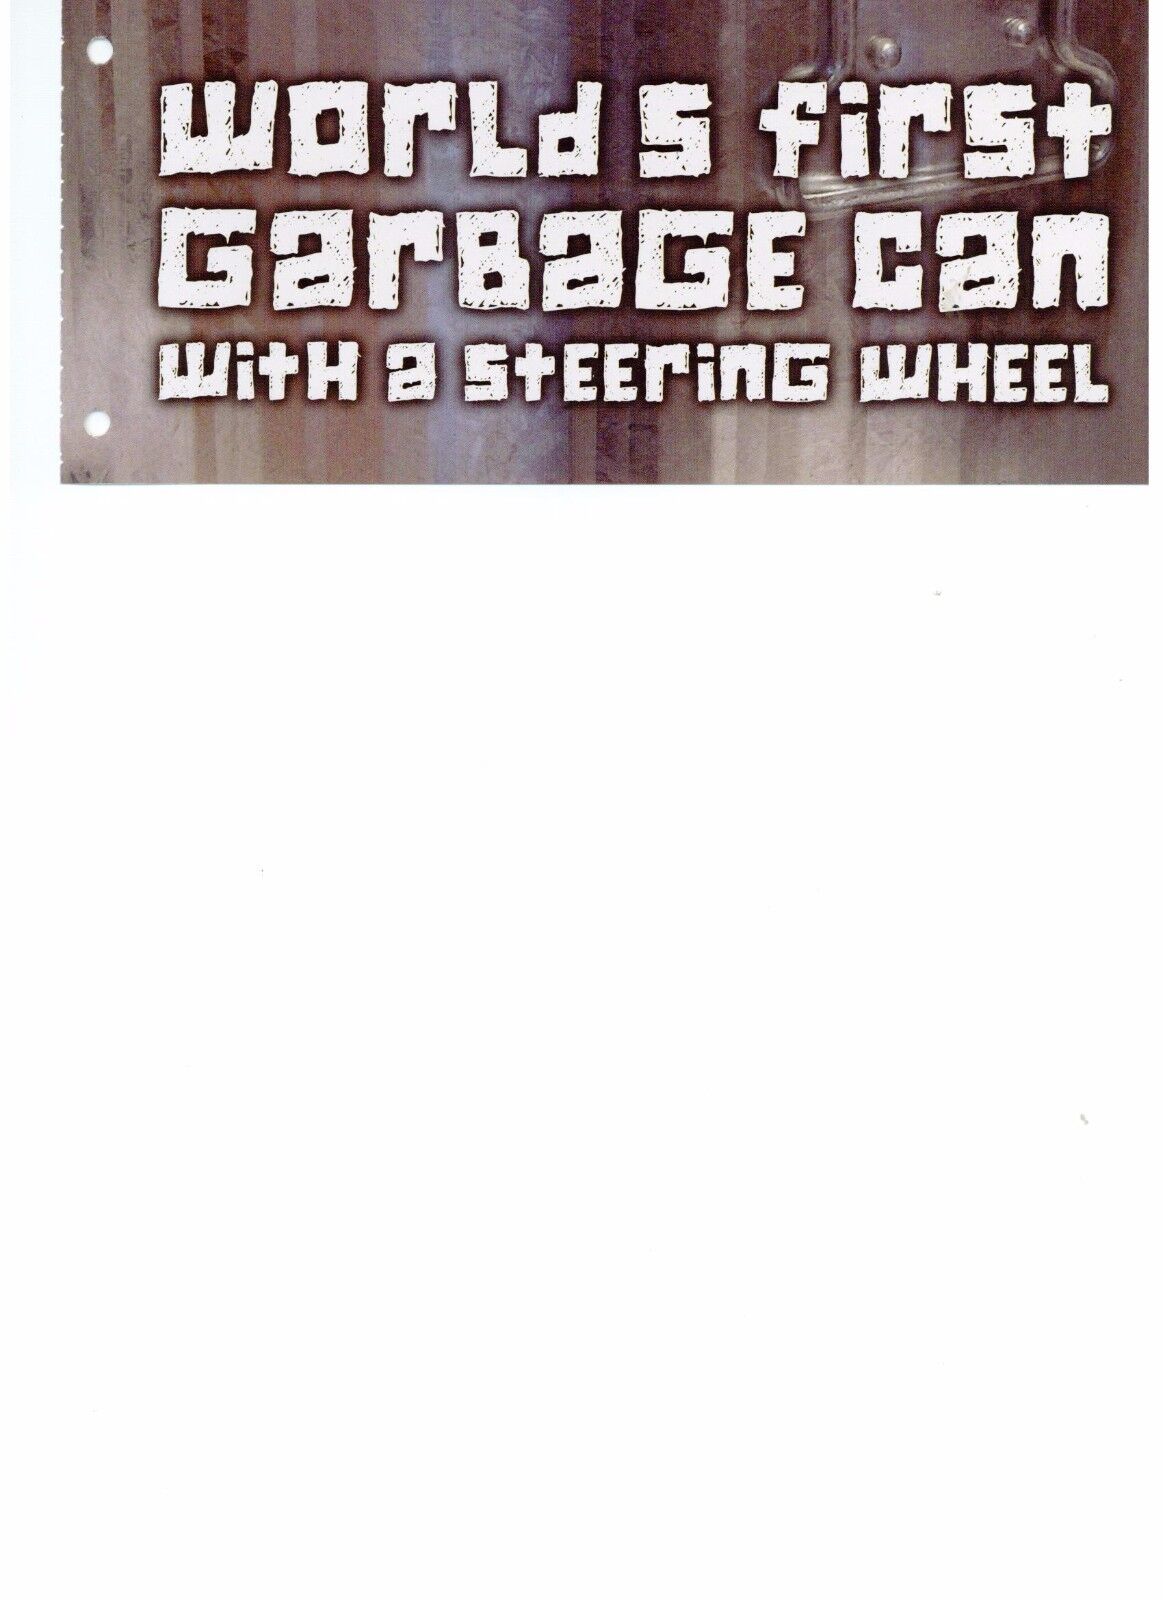 HaHa GAG GIFT Funny Bumper Sticker WORLD'S FIRST GARBAGE CAN WITH STEERING WHEEL